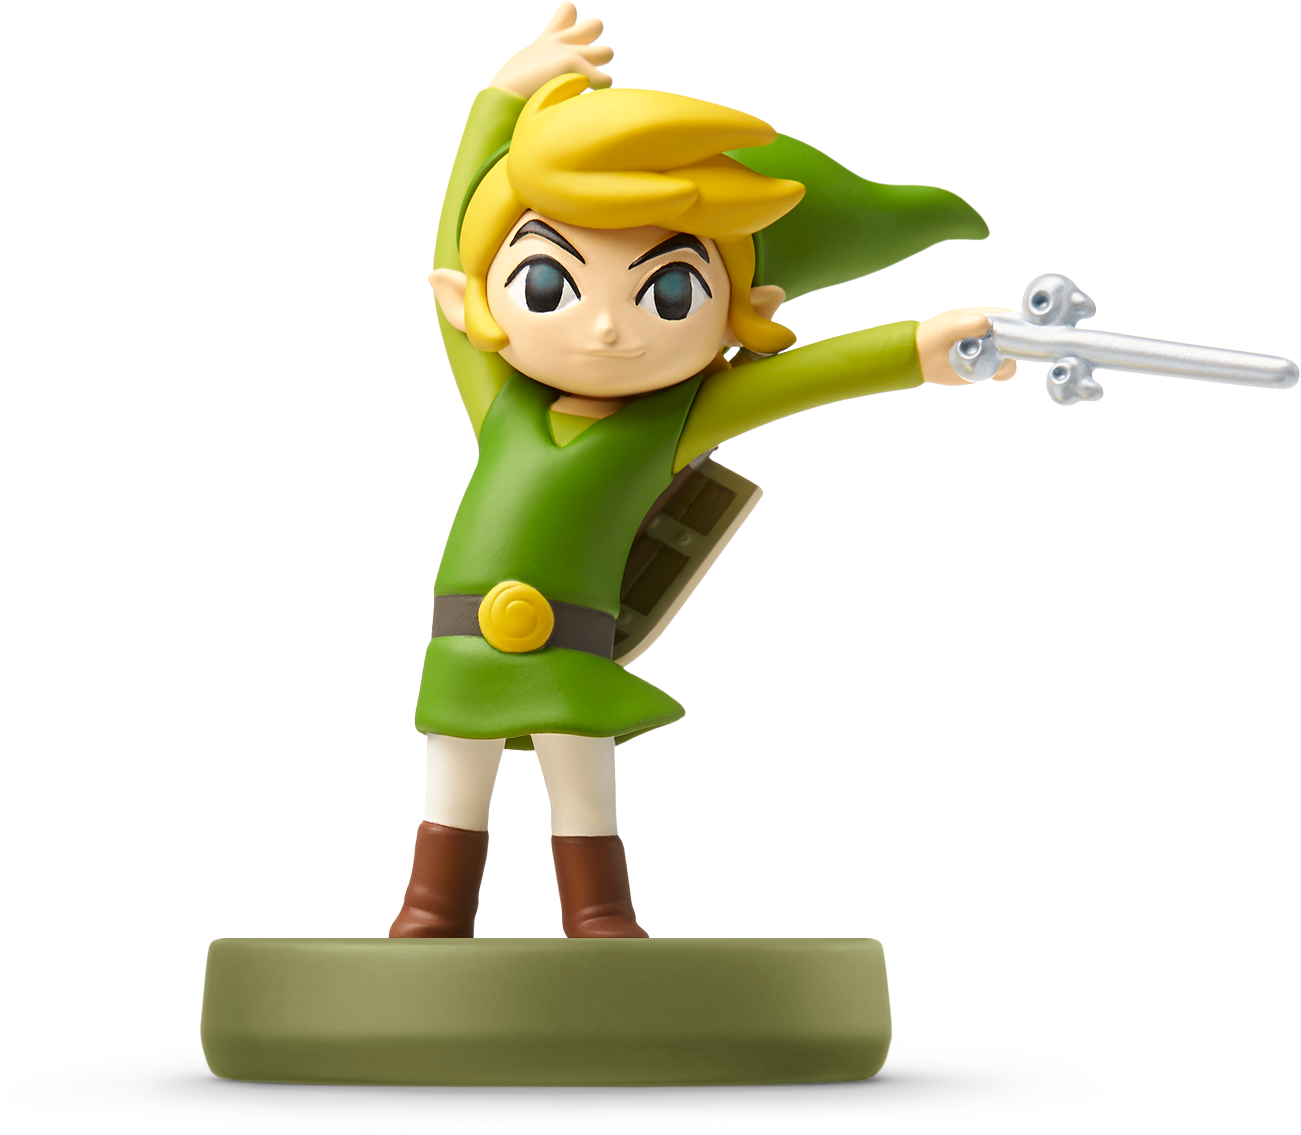 TLoZ Toon Link (The Wind Waker) amiibo.png